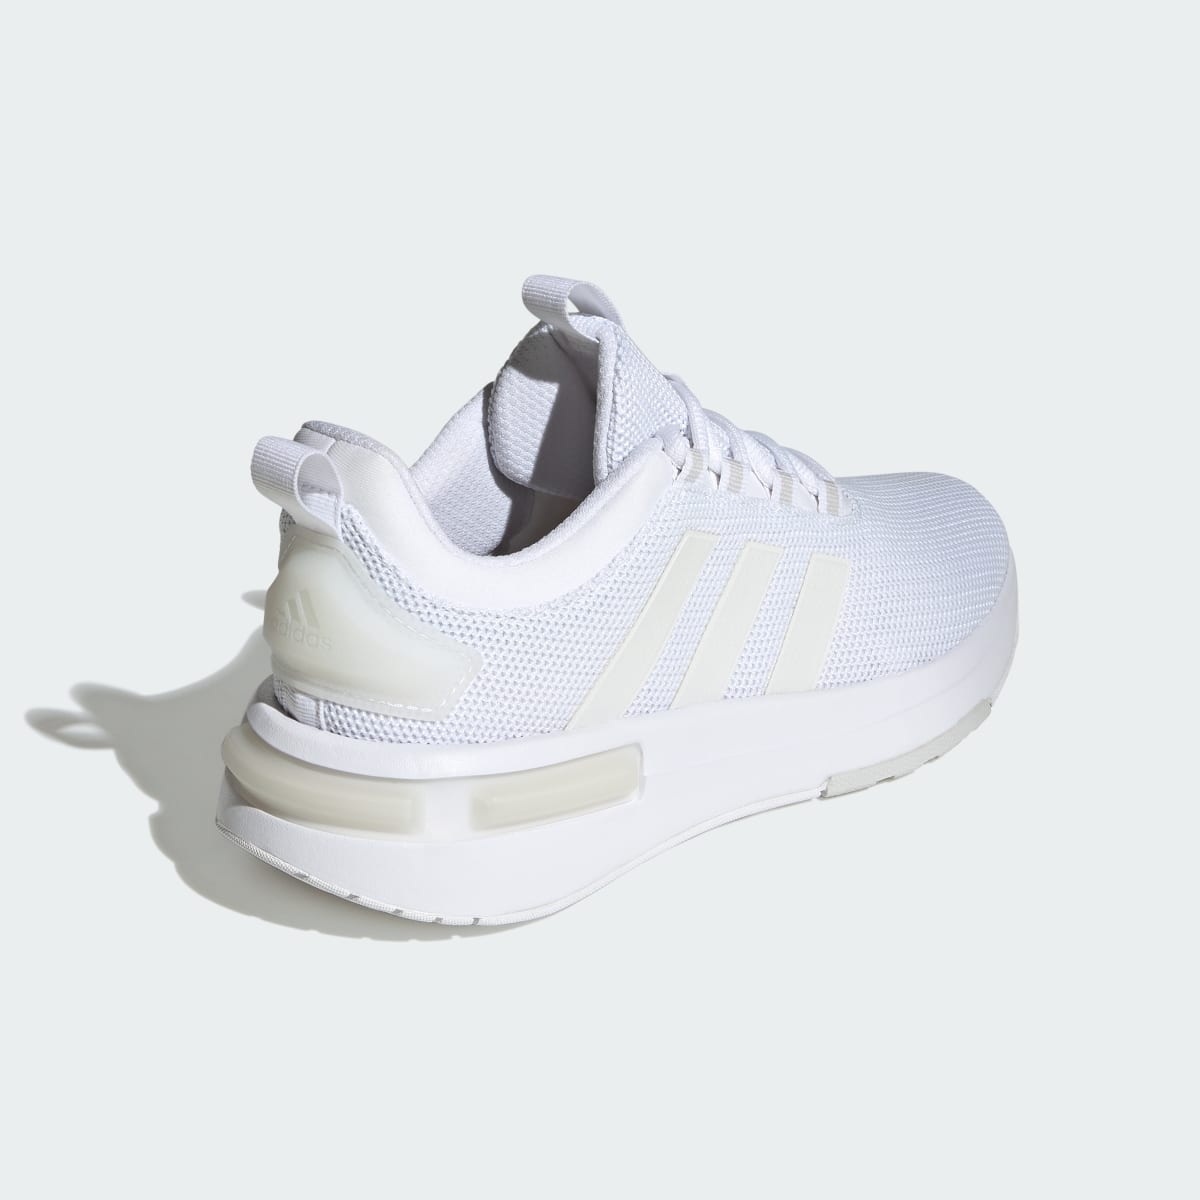 Adidas Racer TR23 Shoes. 6